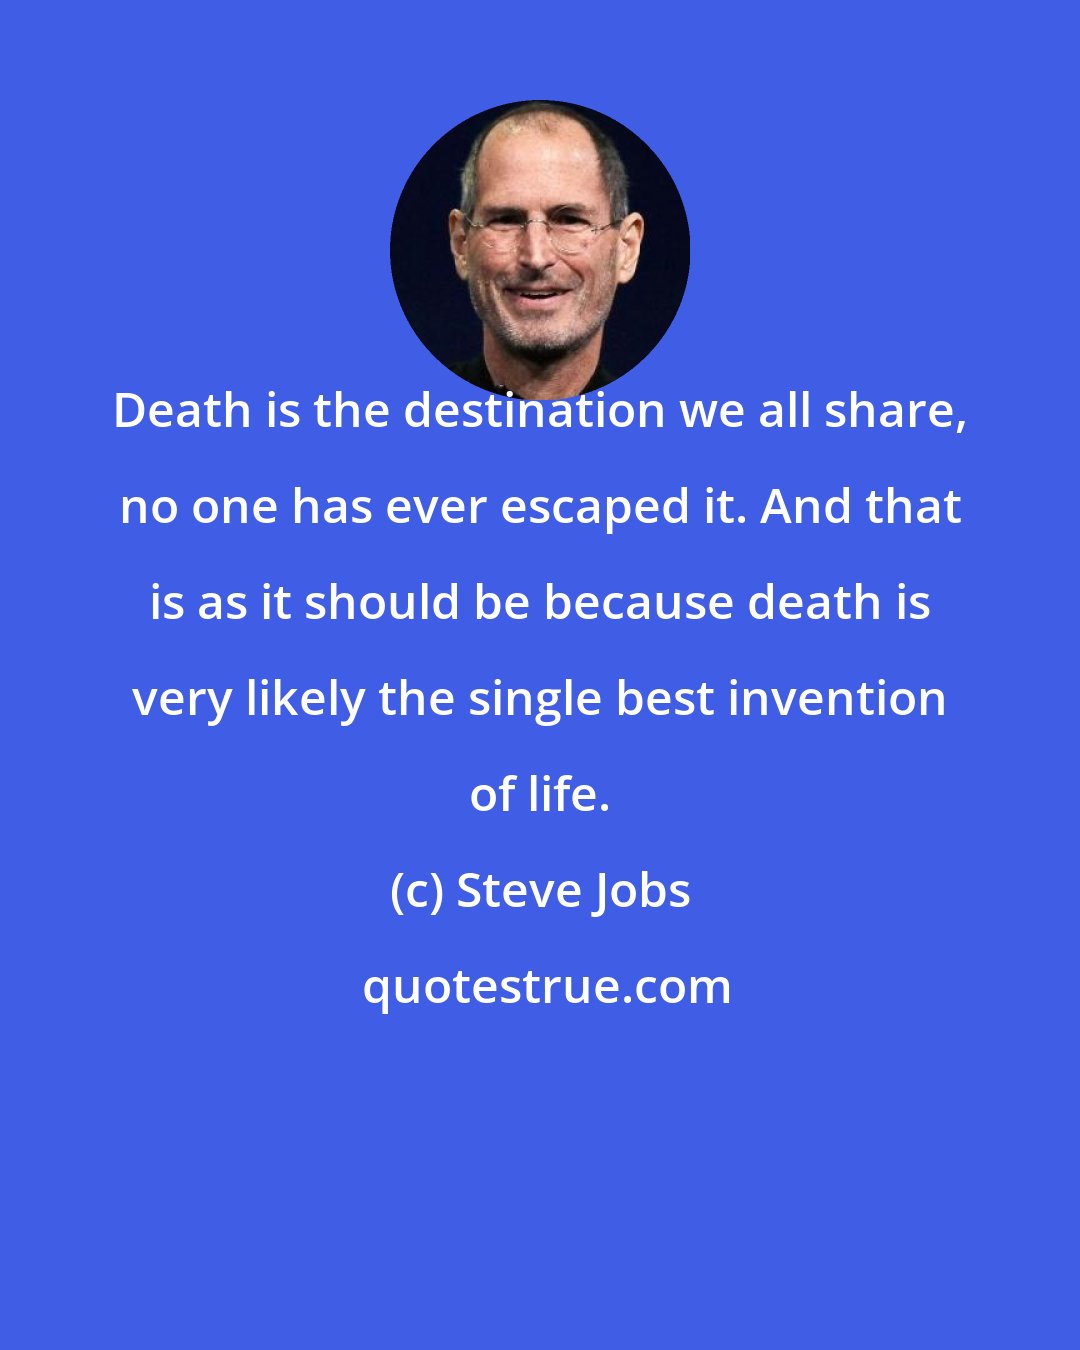 Steve Jobs: Death is the destination we all share, no one has ever escaped it. And that is as it should be because death is very likely the single best invention of life.